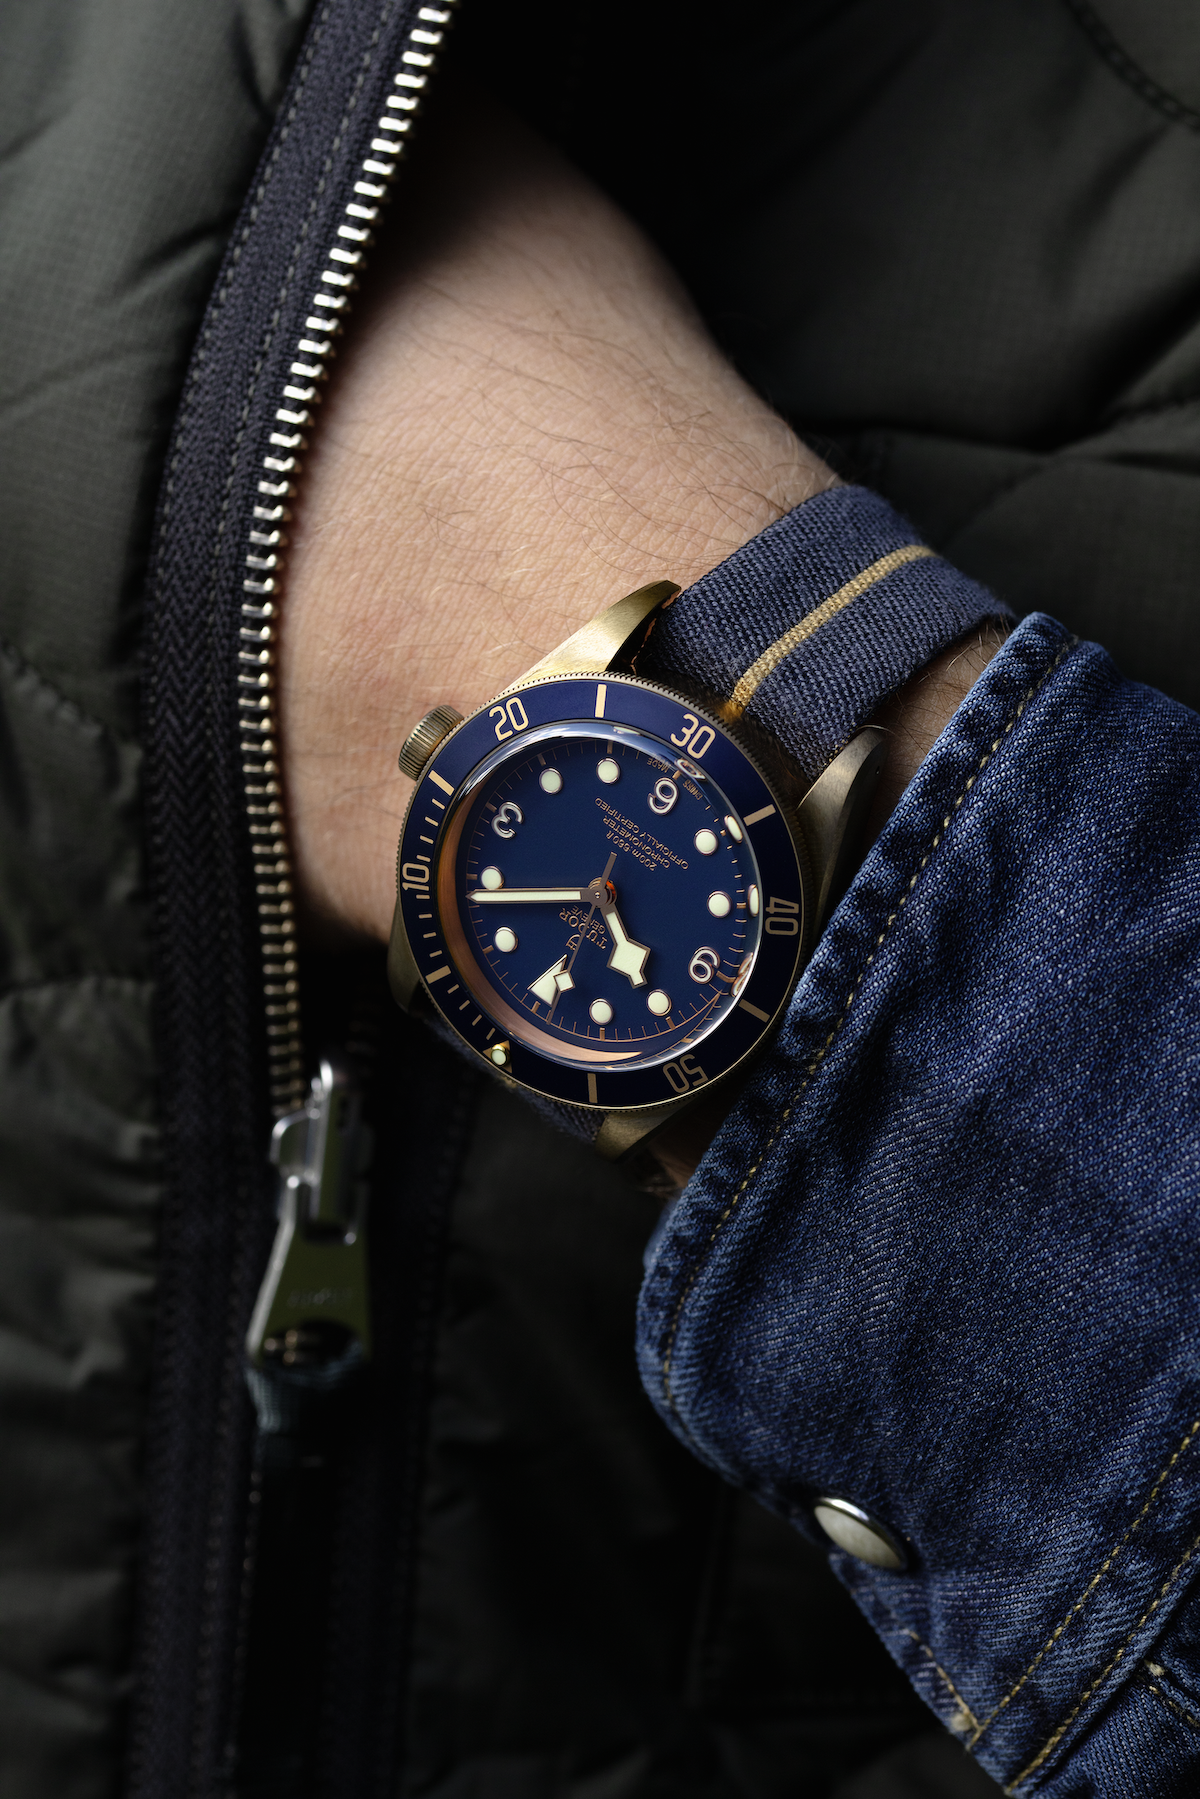 A Cool Tudor Edition Dive Watch Is in the